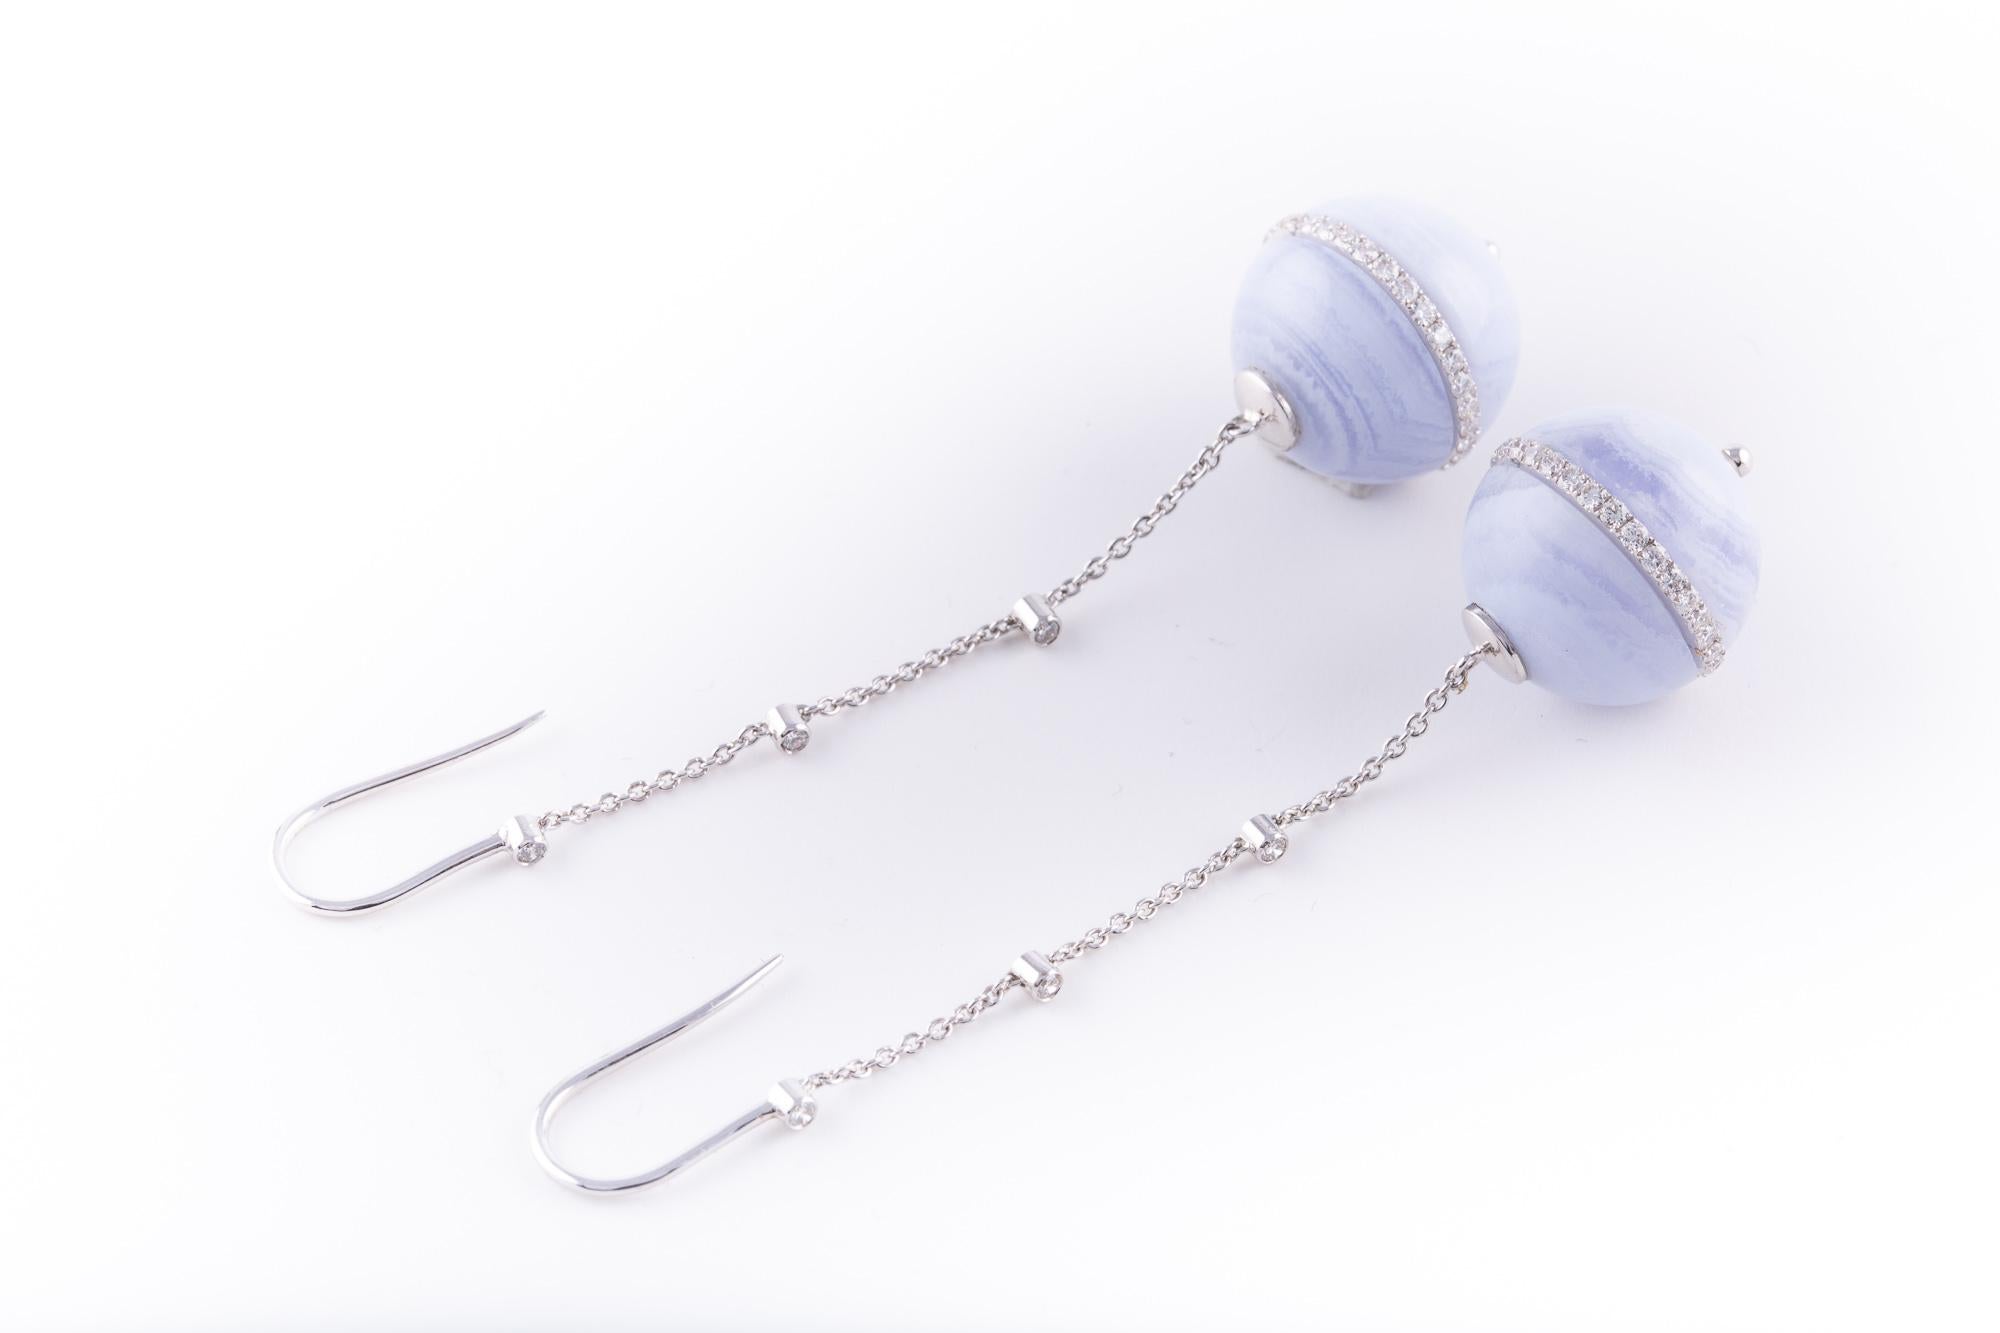 Atelo’s Boule Collection combines voluminous shapes with vivid colours, resulting in bold, free-spirited pieces with a charming elegance.

Lavender agate and diamond earrings in 18 karat white gold.

White, brilliant-cut diamonds are set along the